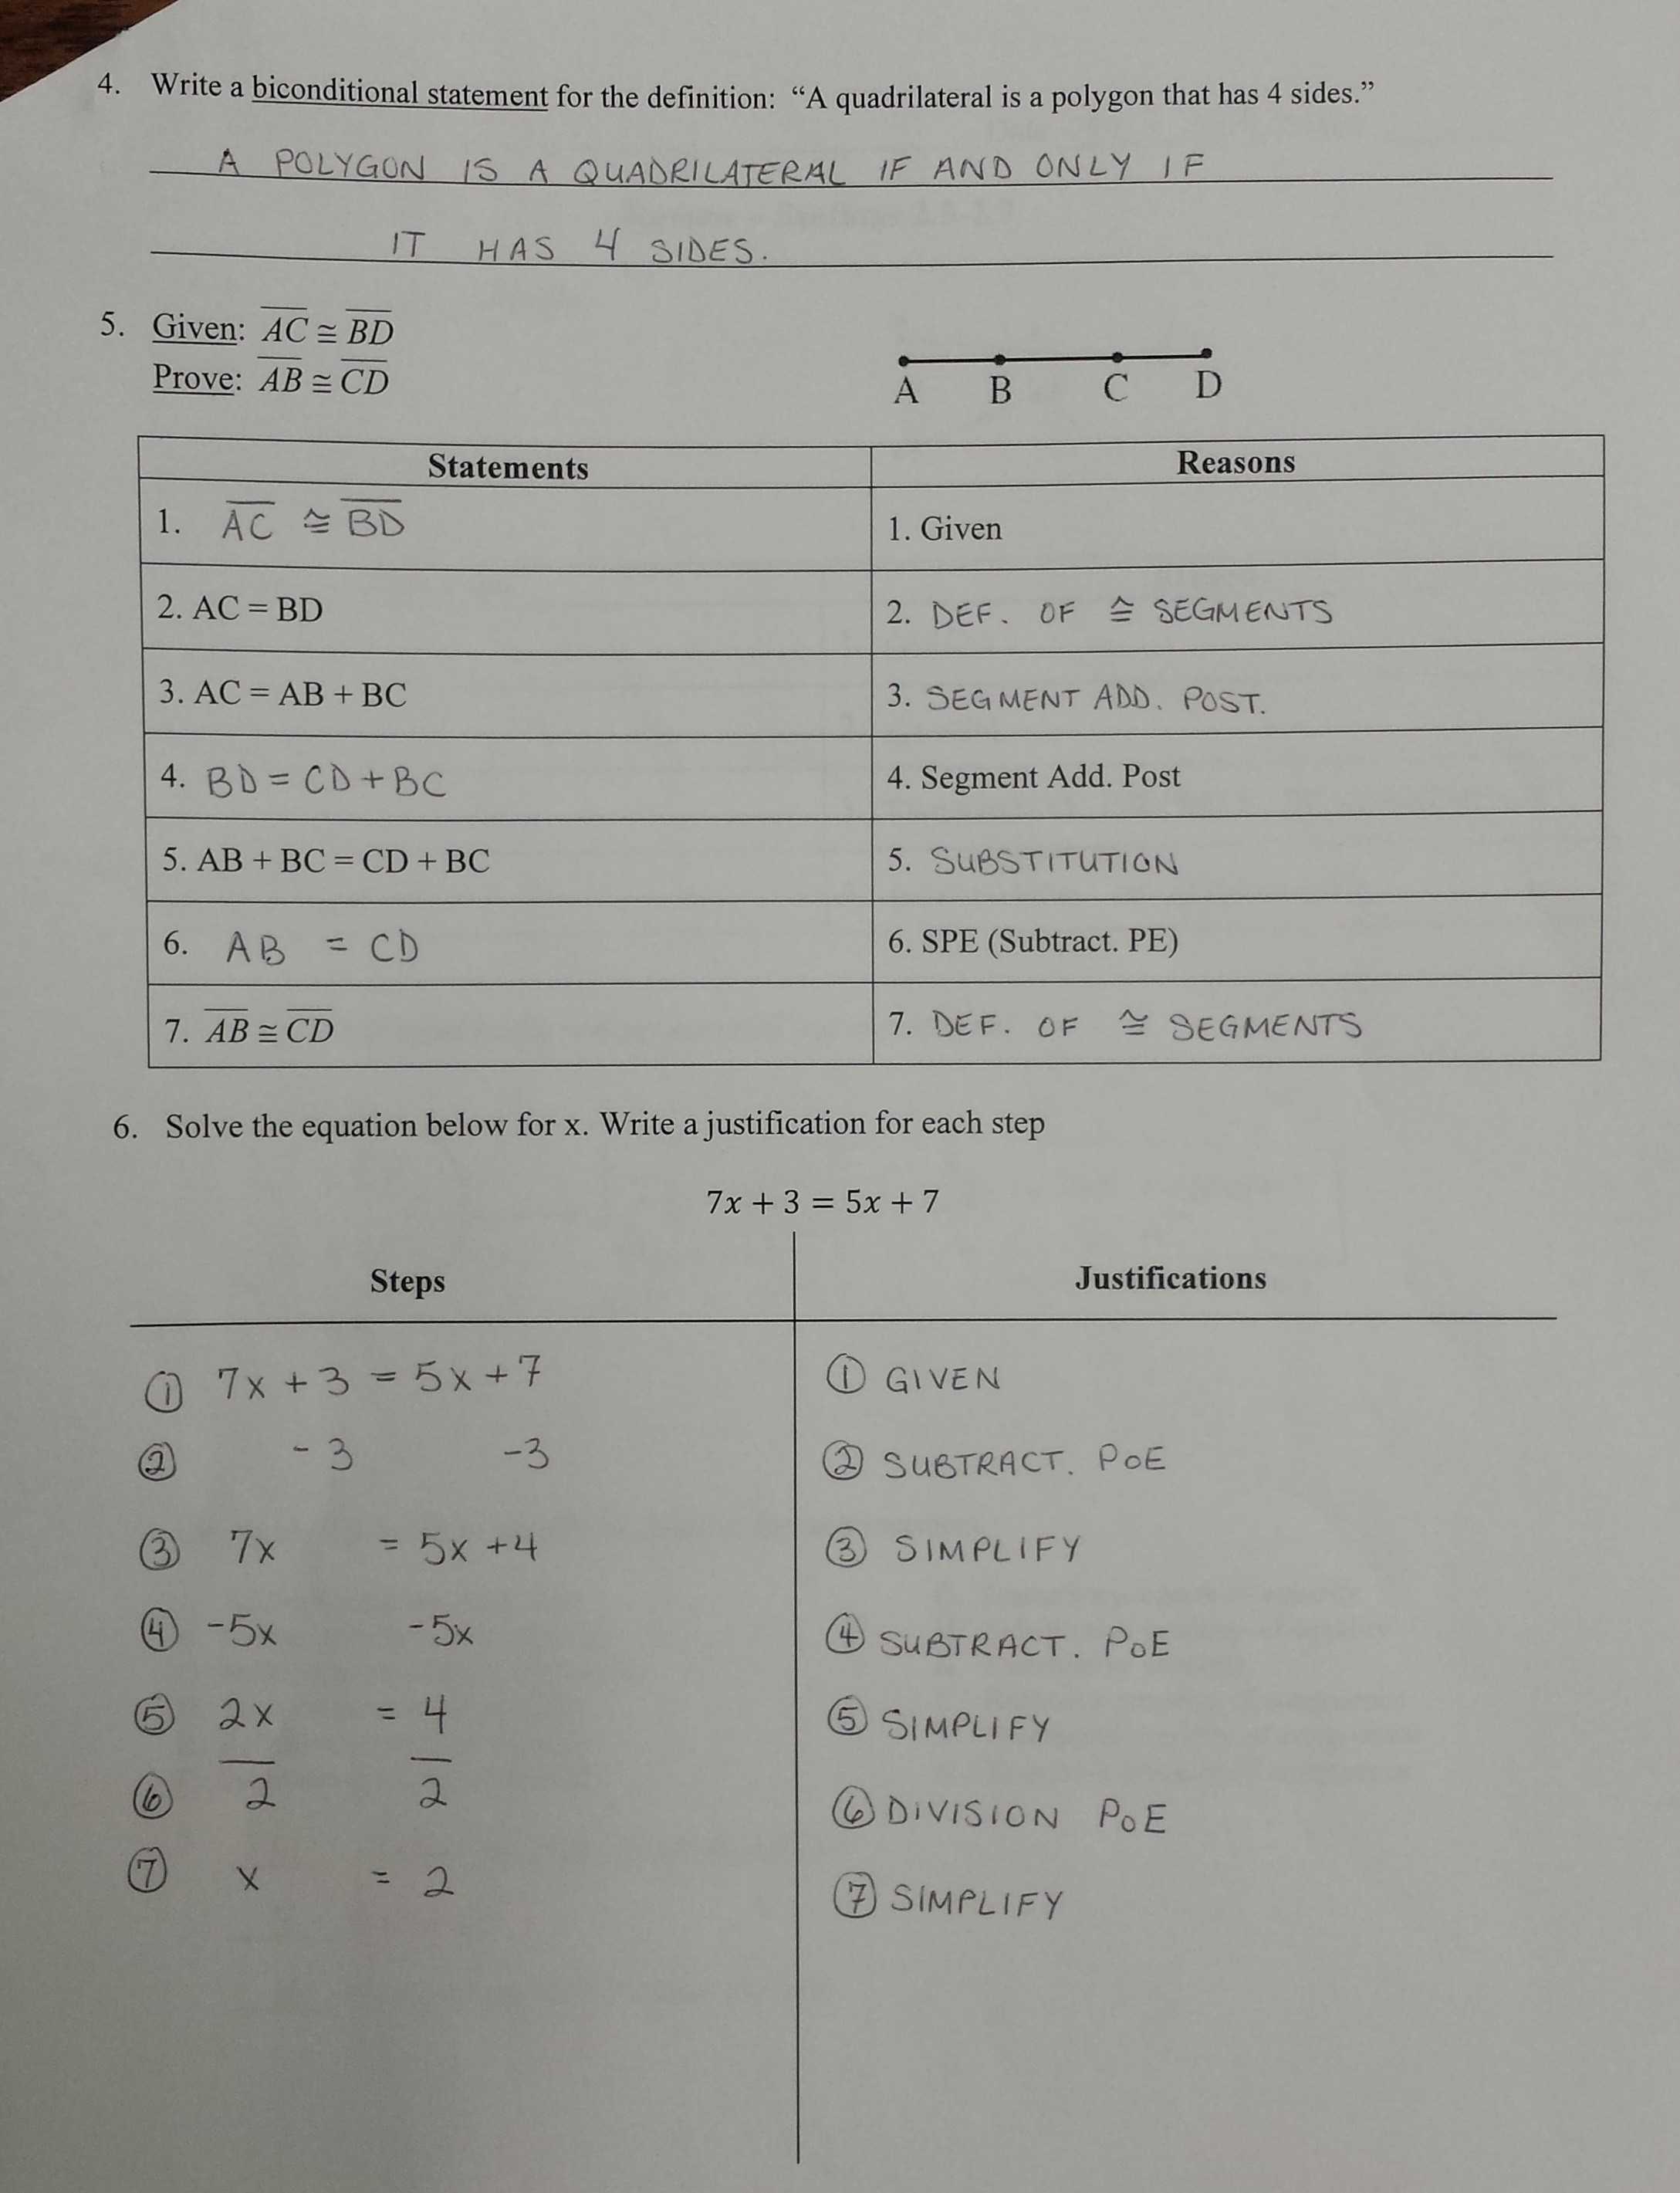 Characteristics Of Bacteria Worksheet Answers as Well as Basic Geometry Definitions Worksheet Answers Inspirational 118 Best